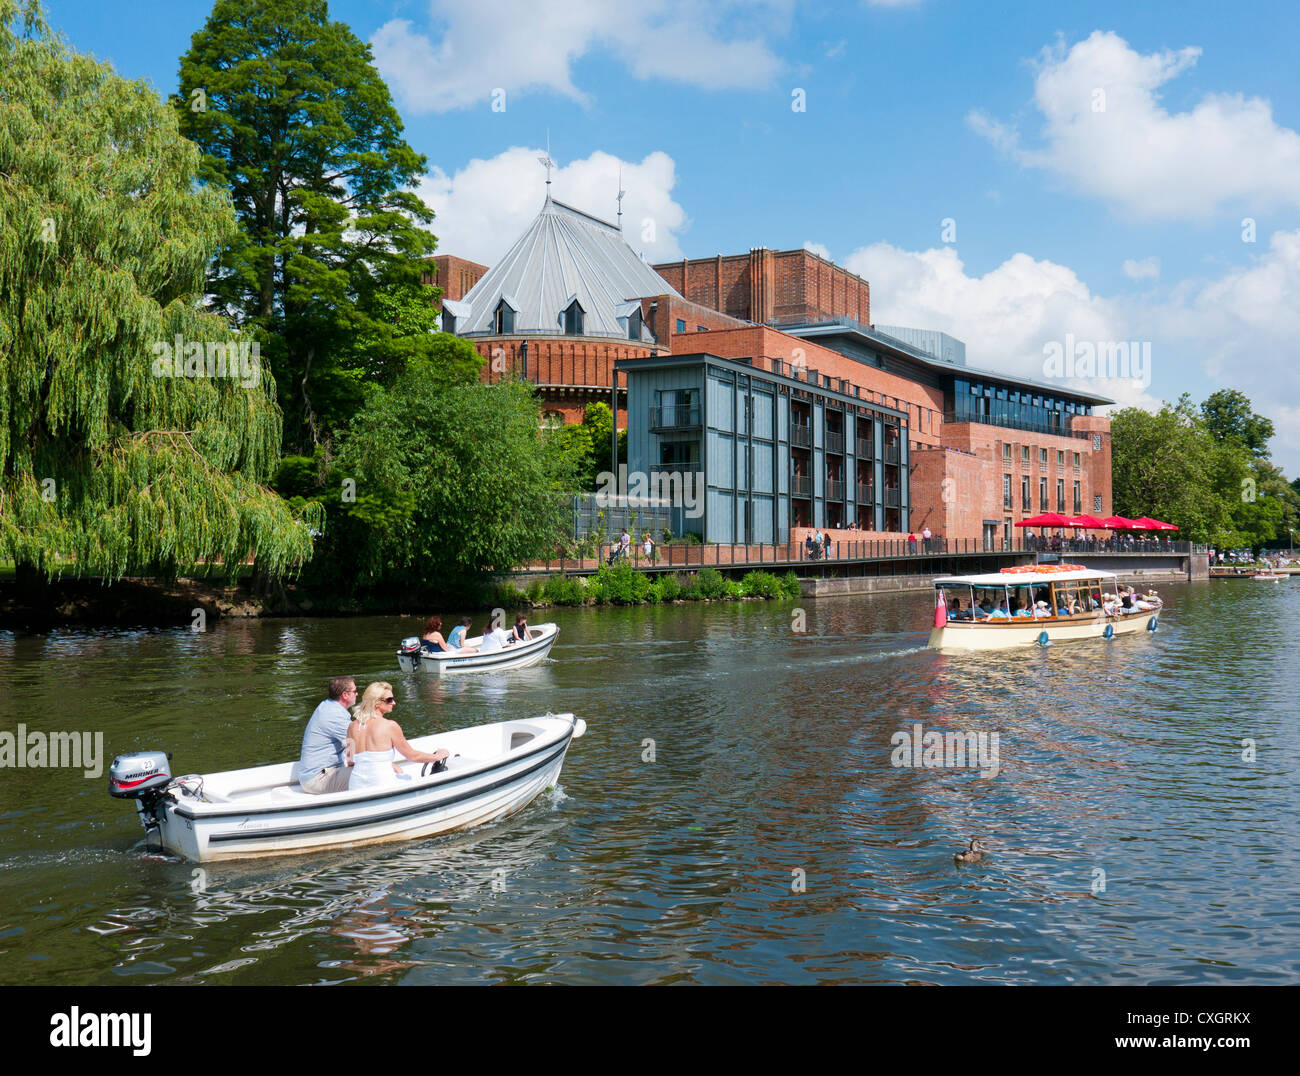 People in leisure boats on the river Avon next to the Royal Shakespeare Company Theatre, Stratford upon Avon, Warwickshire, UK Stock Photo